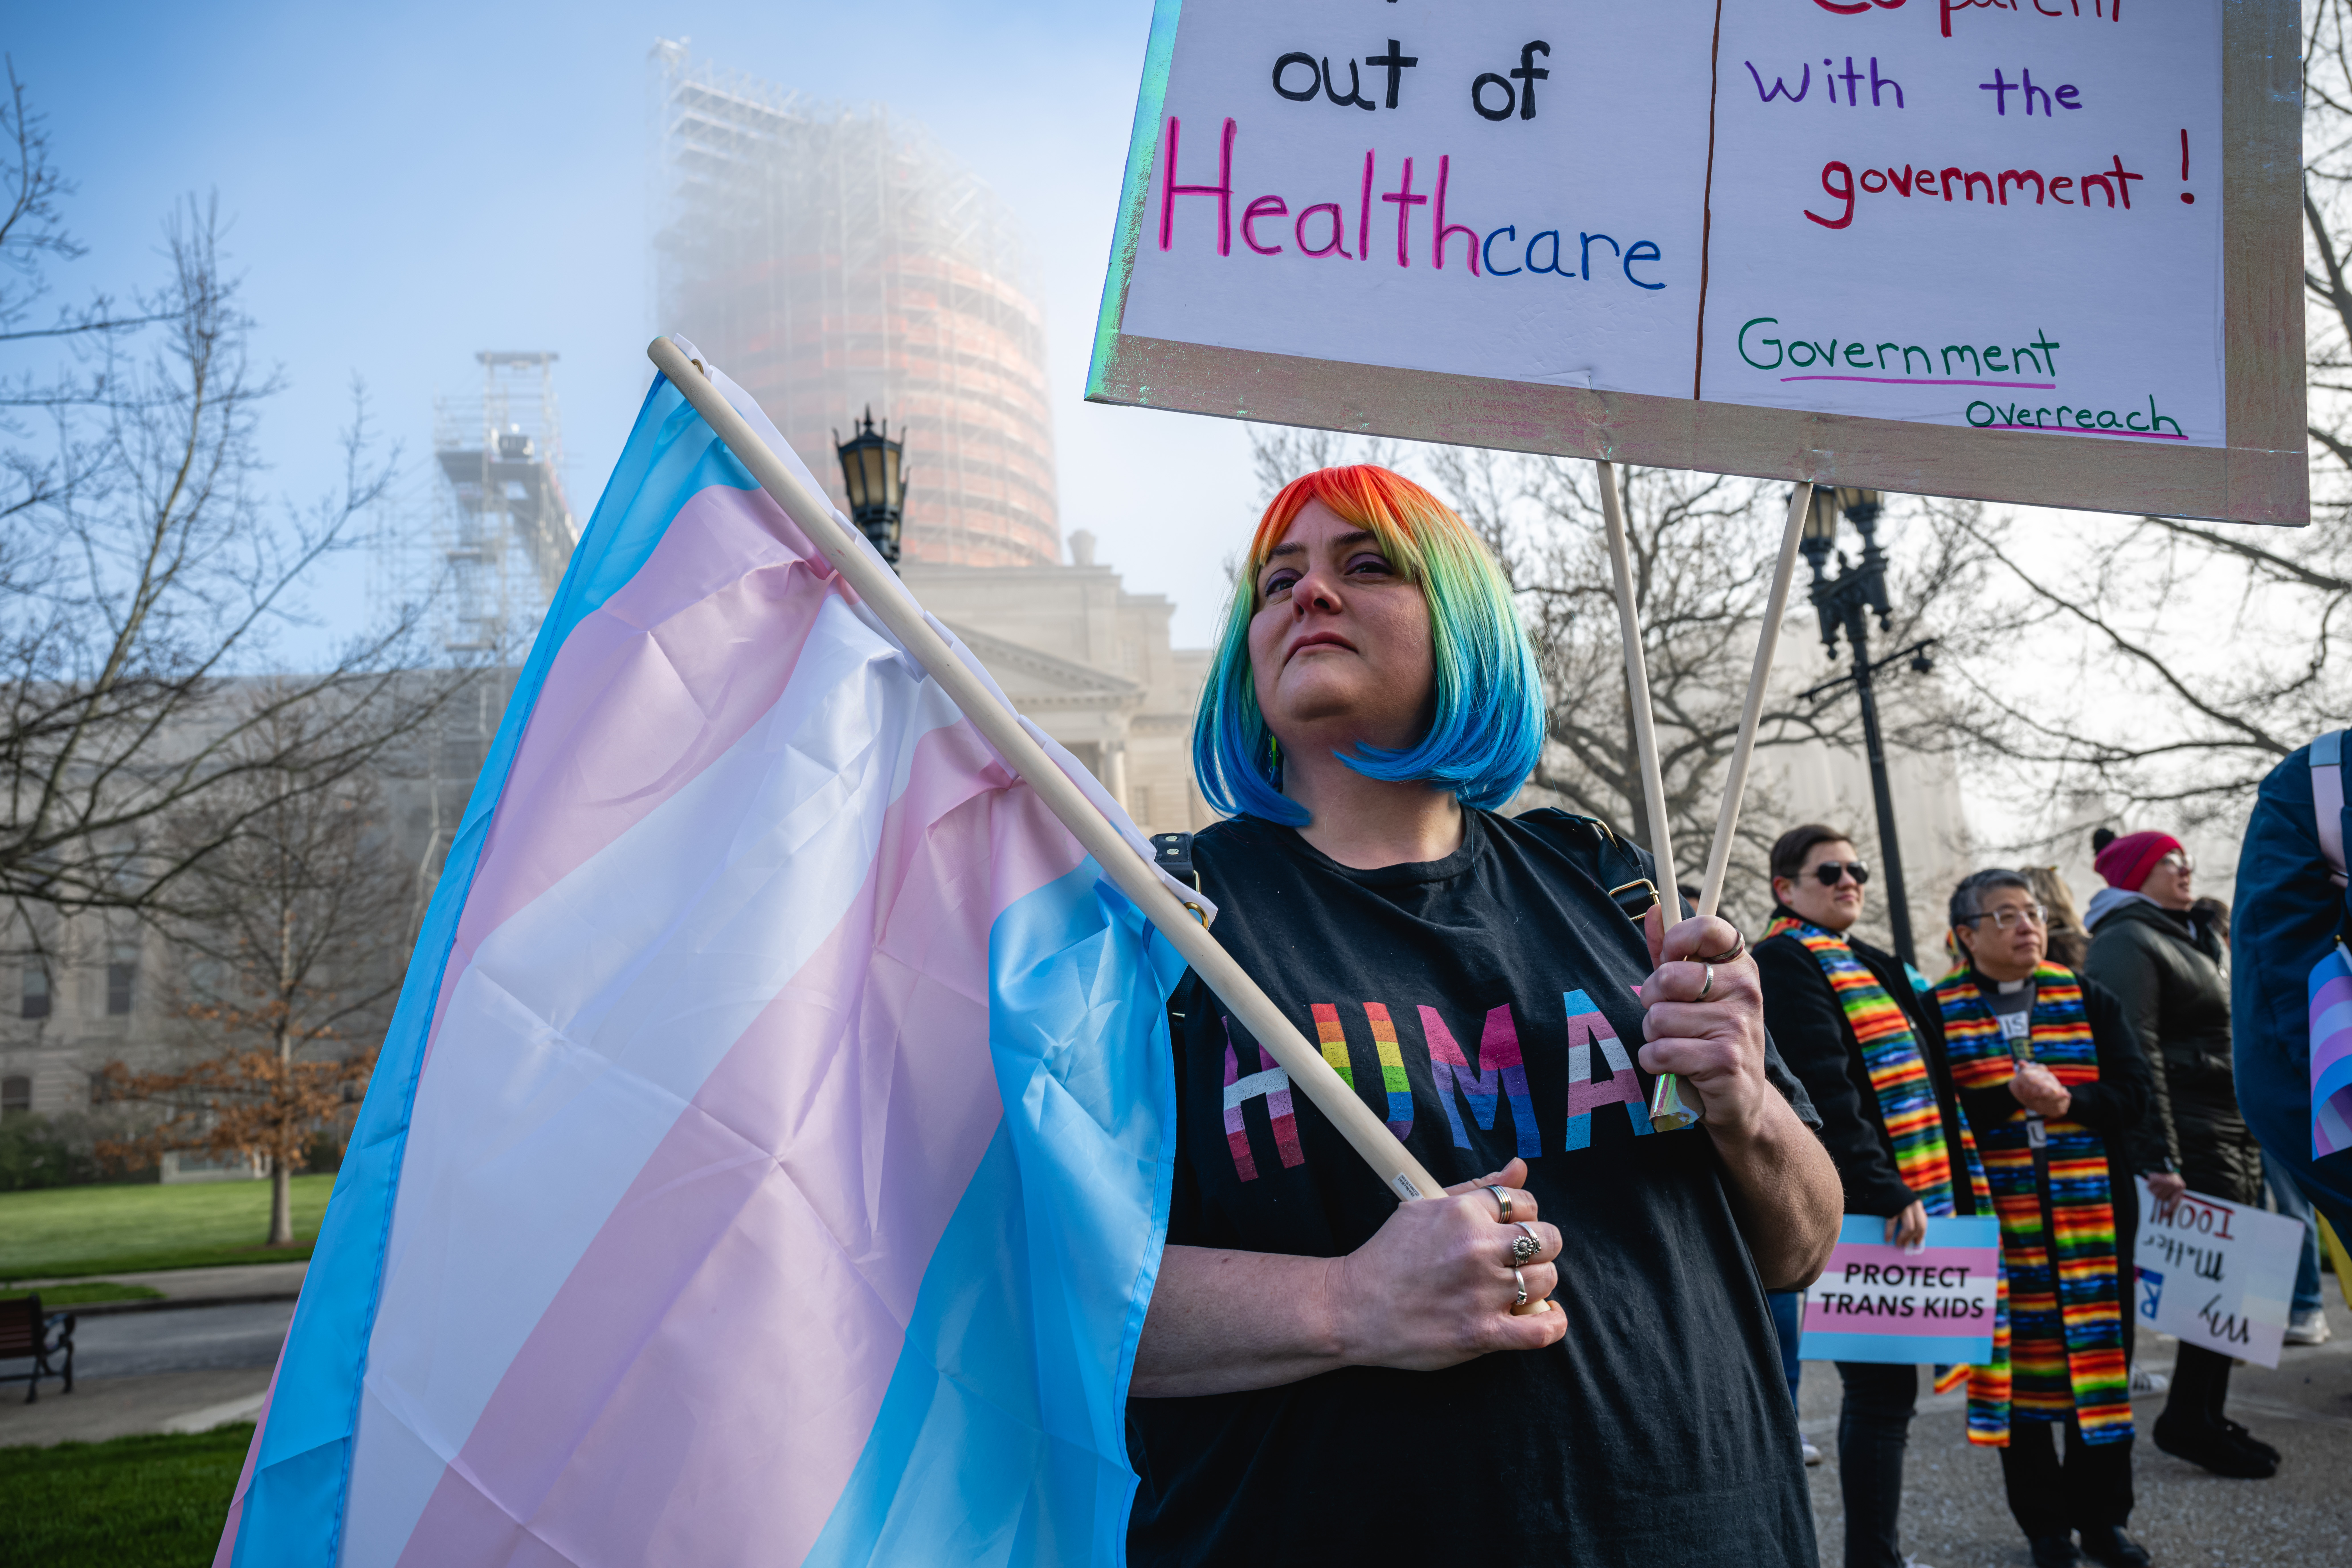 Sarah Newton stands with a trans pride flag during a rally to protest the passing of SB 150 on March 29, 2023 at the Kentucky State Capitol in Frankfort, Kentucky. SB 150, which was proposed by State Senator Max Wise (R-KY), is criticized by many as a "Don't Say Gay" bill and was vetoed by Kentucky Governor Andy Beshear during the General Assembly. Lawmakers may override this veto, passing the bill into law. (Photo by Jon Cherry/Getty Images)